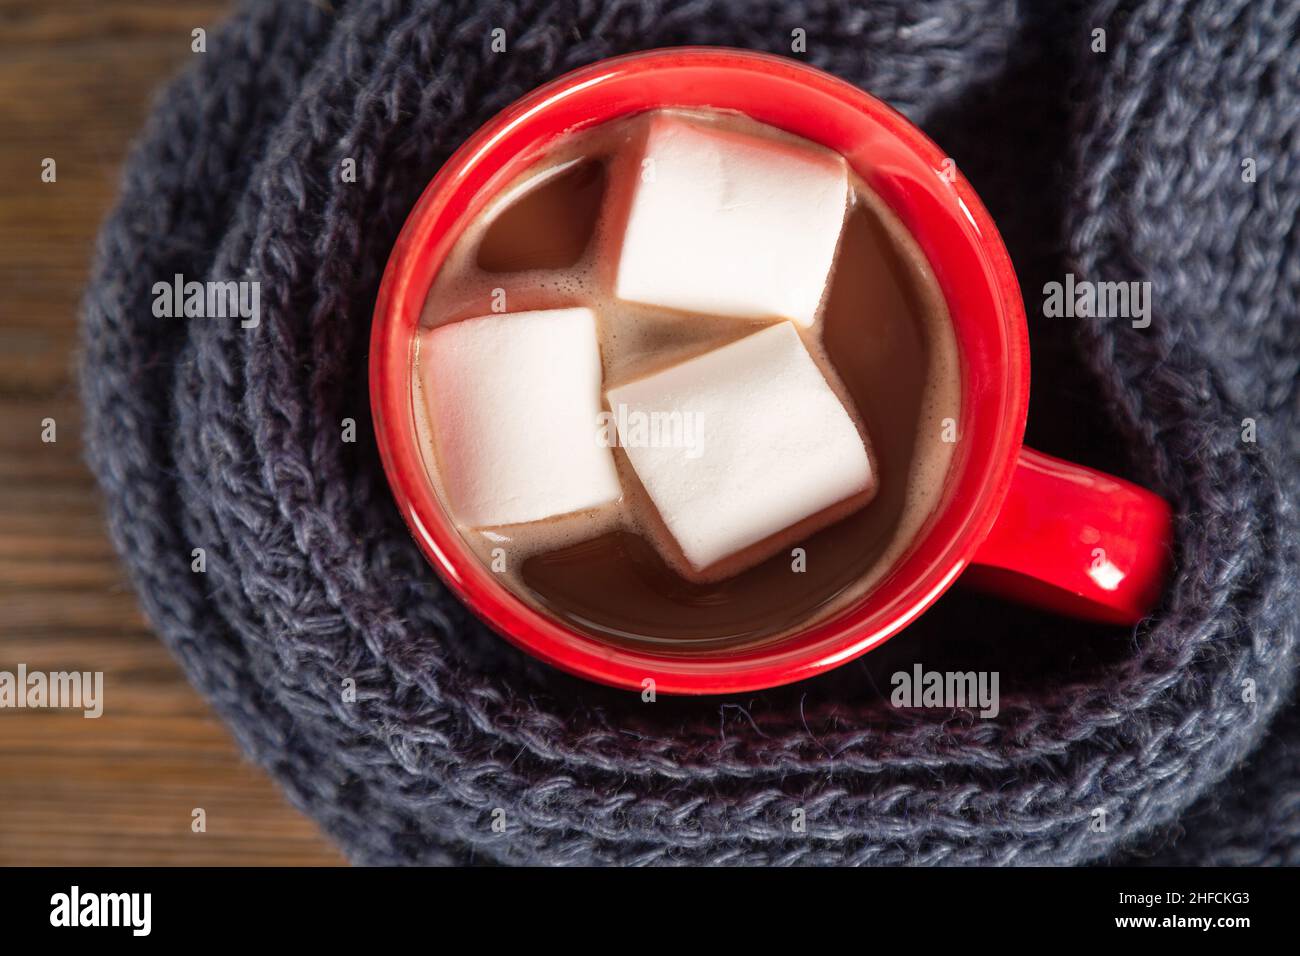 Christmas and winter cozy background with knitted scarf and red mug with cocoa or hot chocolate. Flat lay, top view Stock Photo